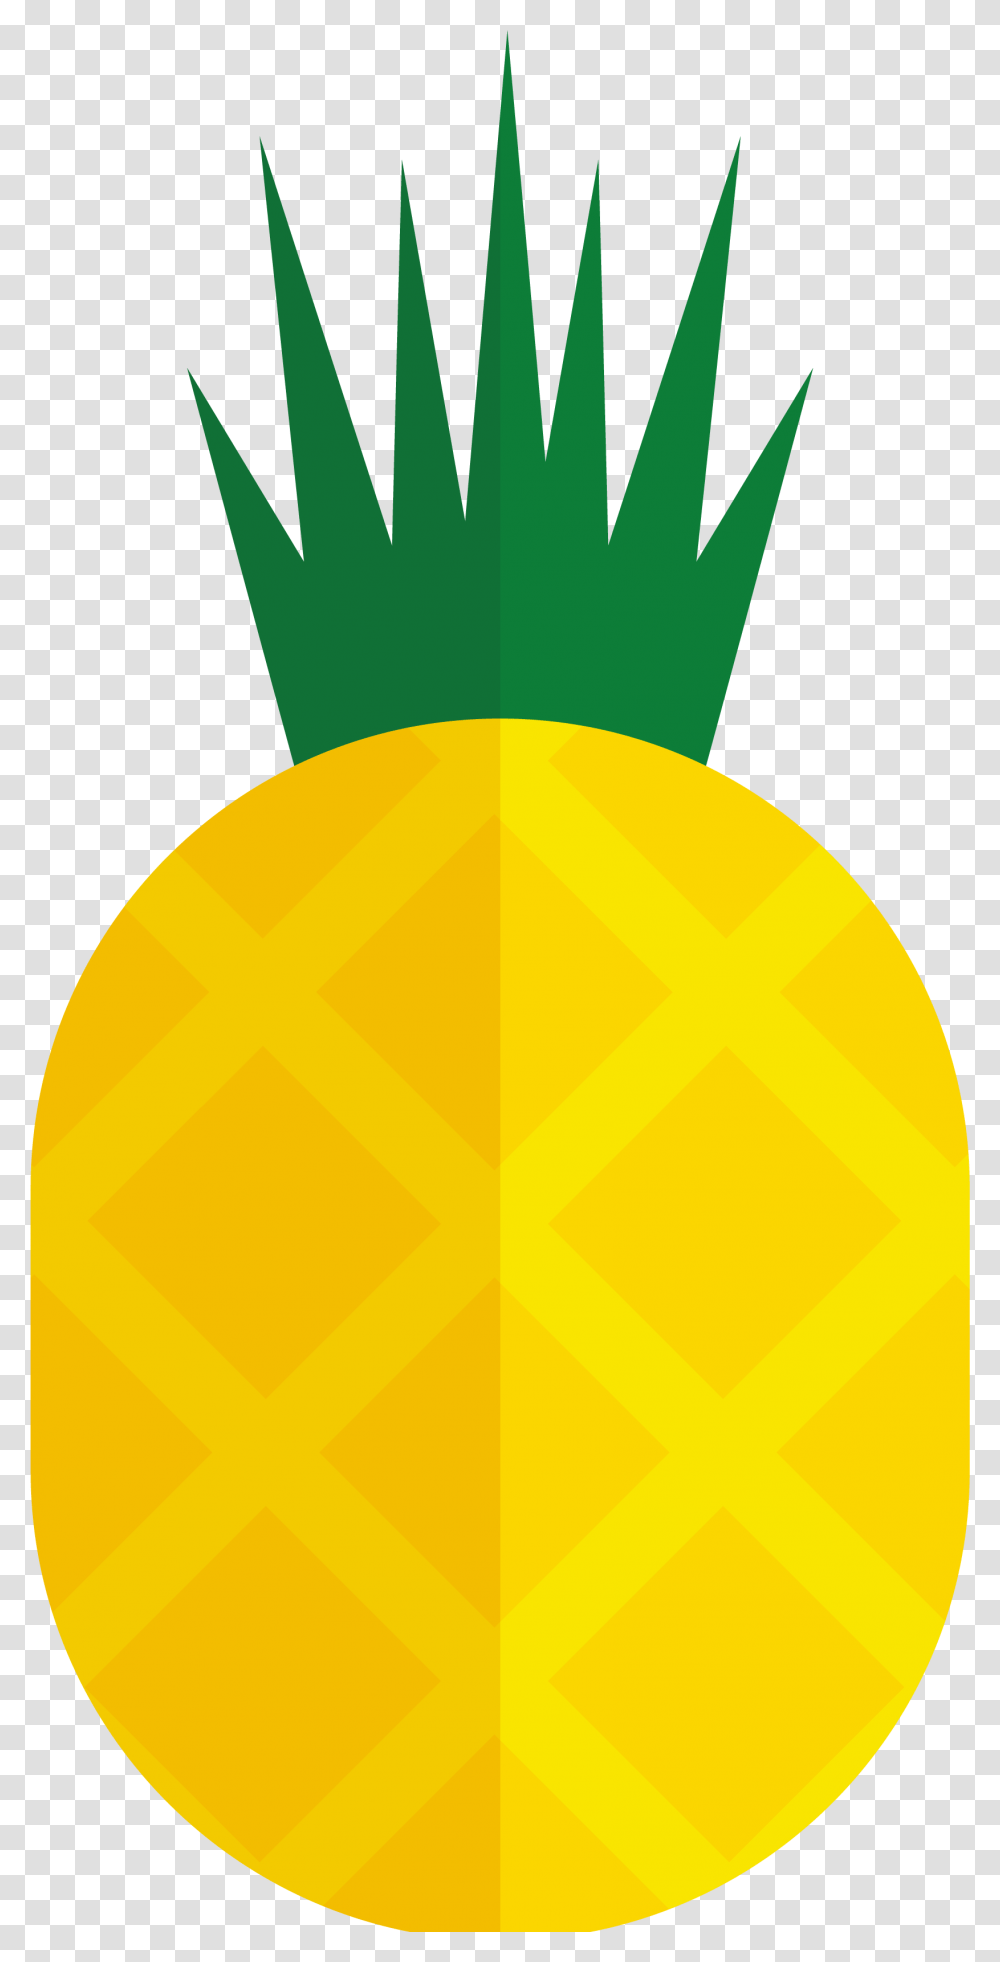 Collection Of Free Pineapple Vector Leaf, Plant, Food, Vegetable, Fruit Transparent Png